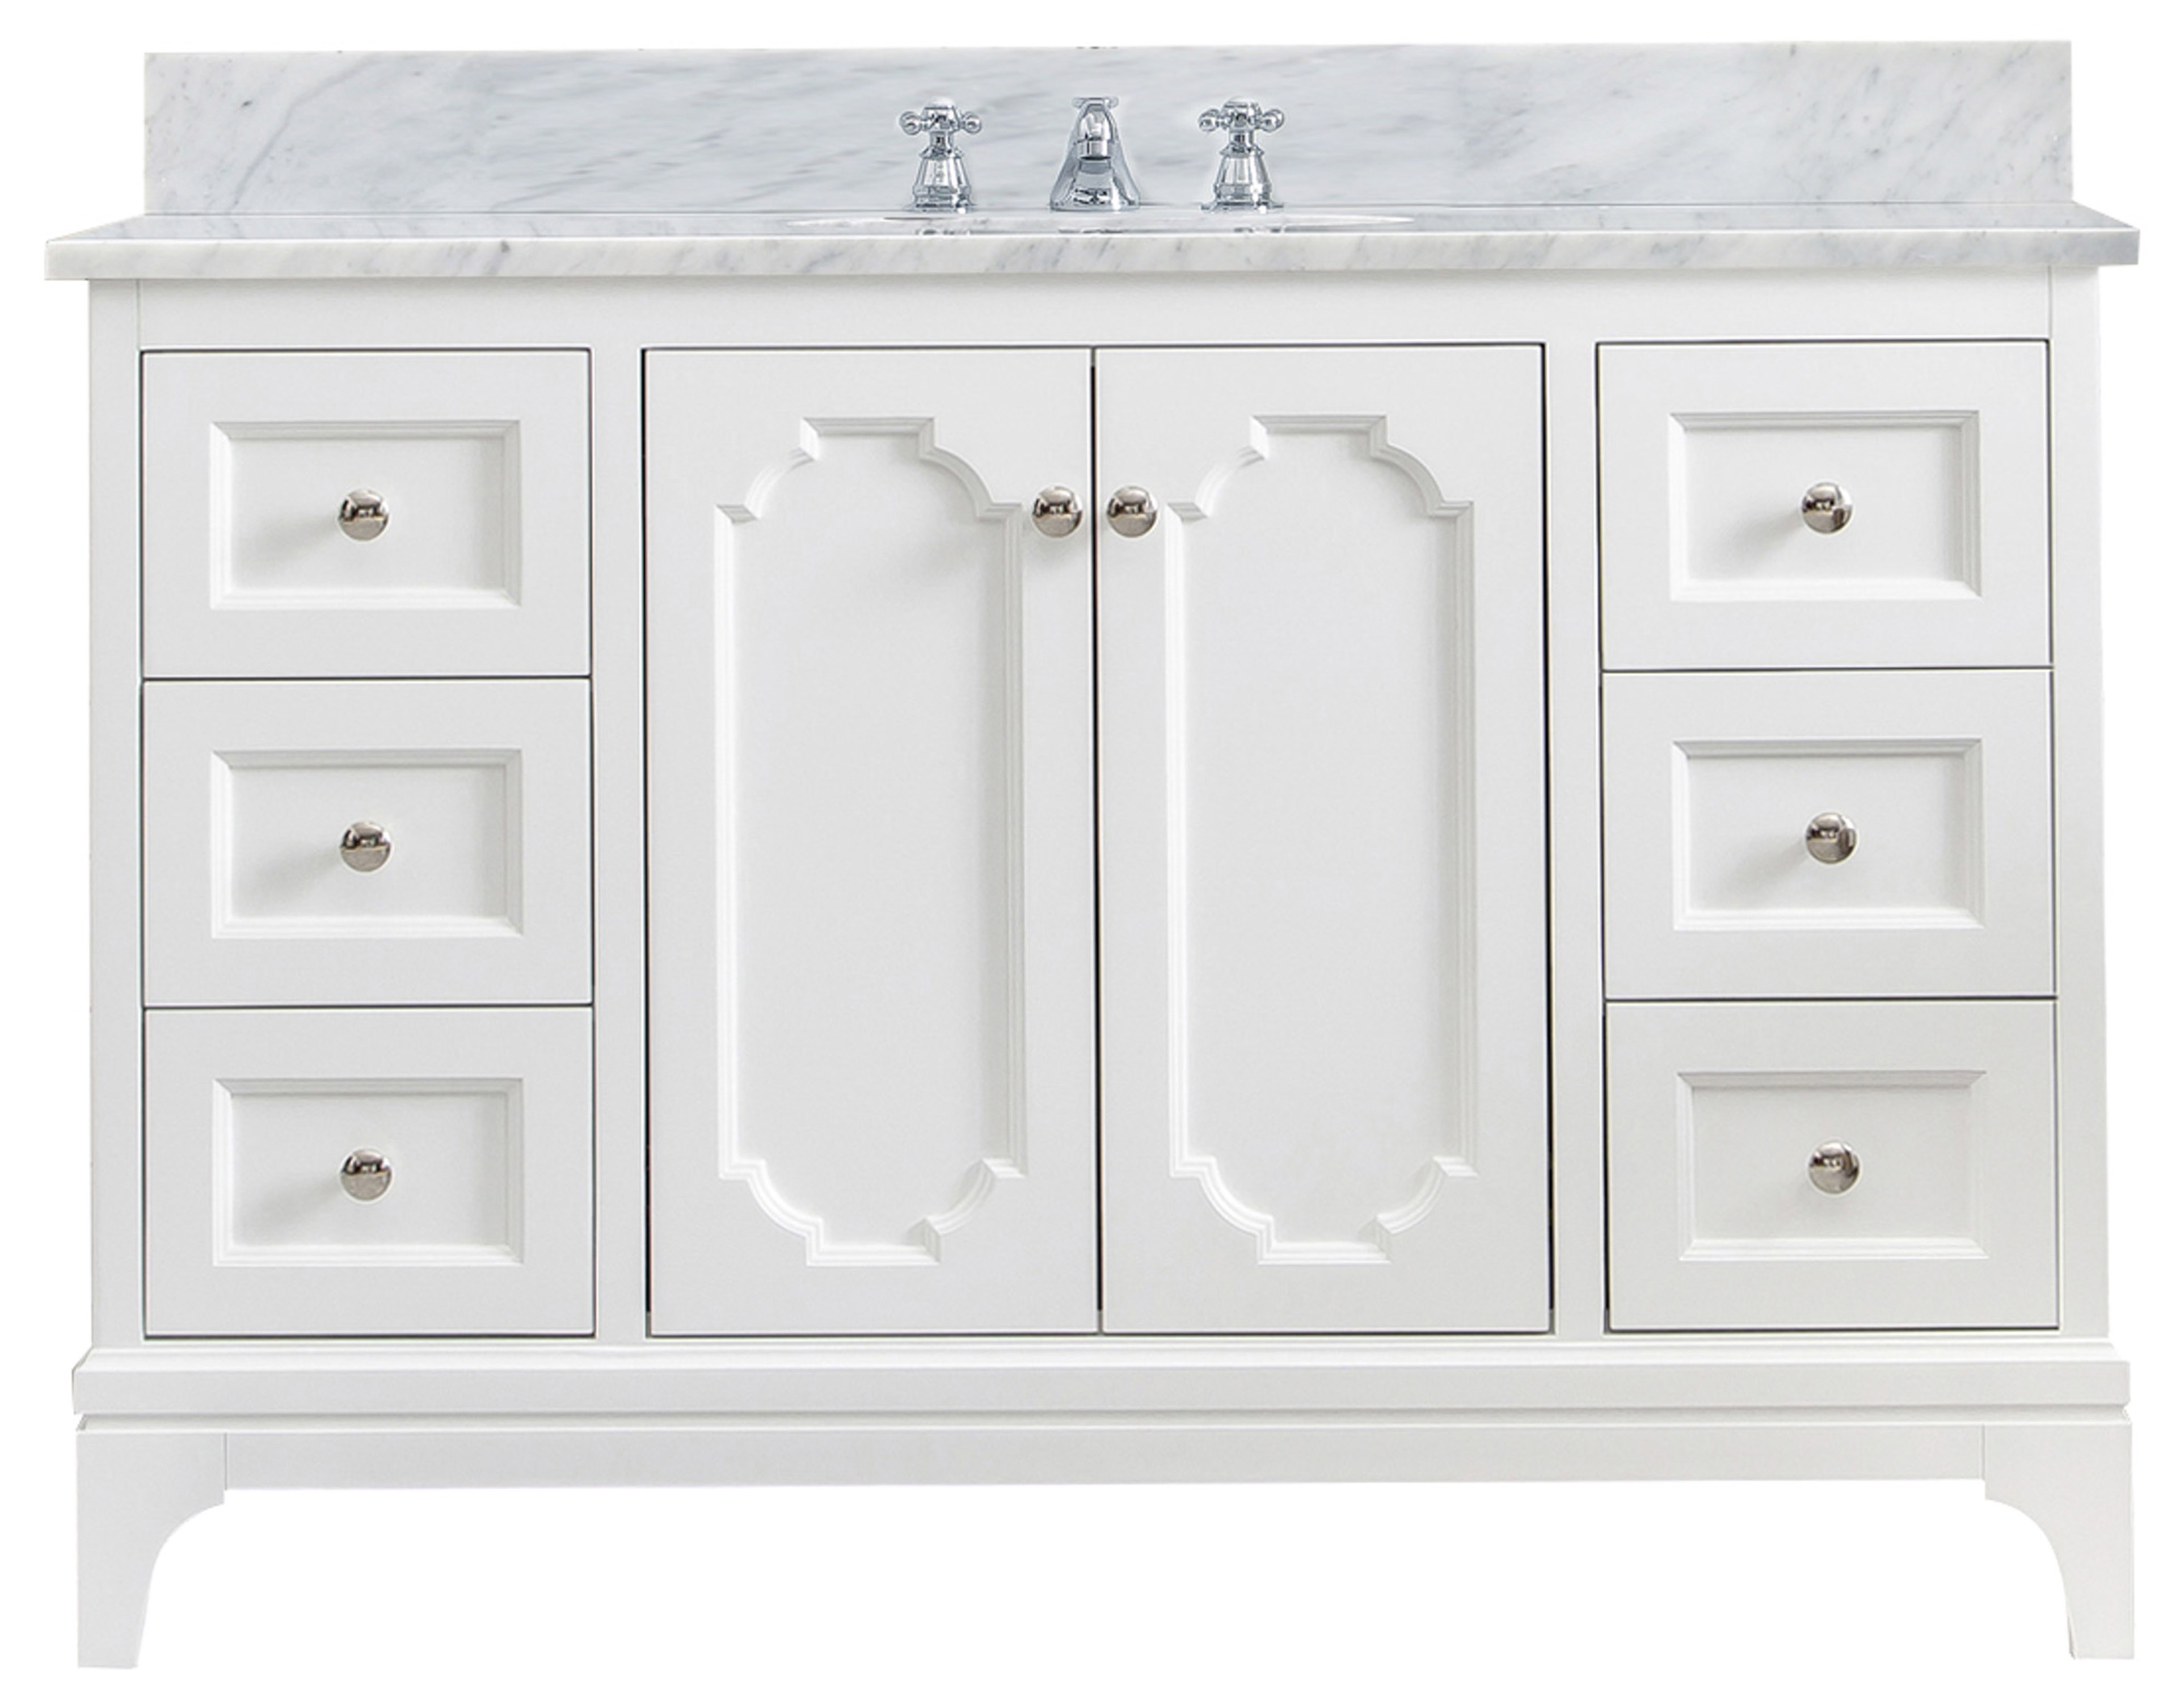 48" Single Sink Carrara White Marble Countertop Vanity in Pure White with Mirror and Faucet Options